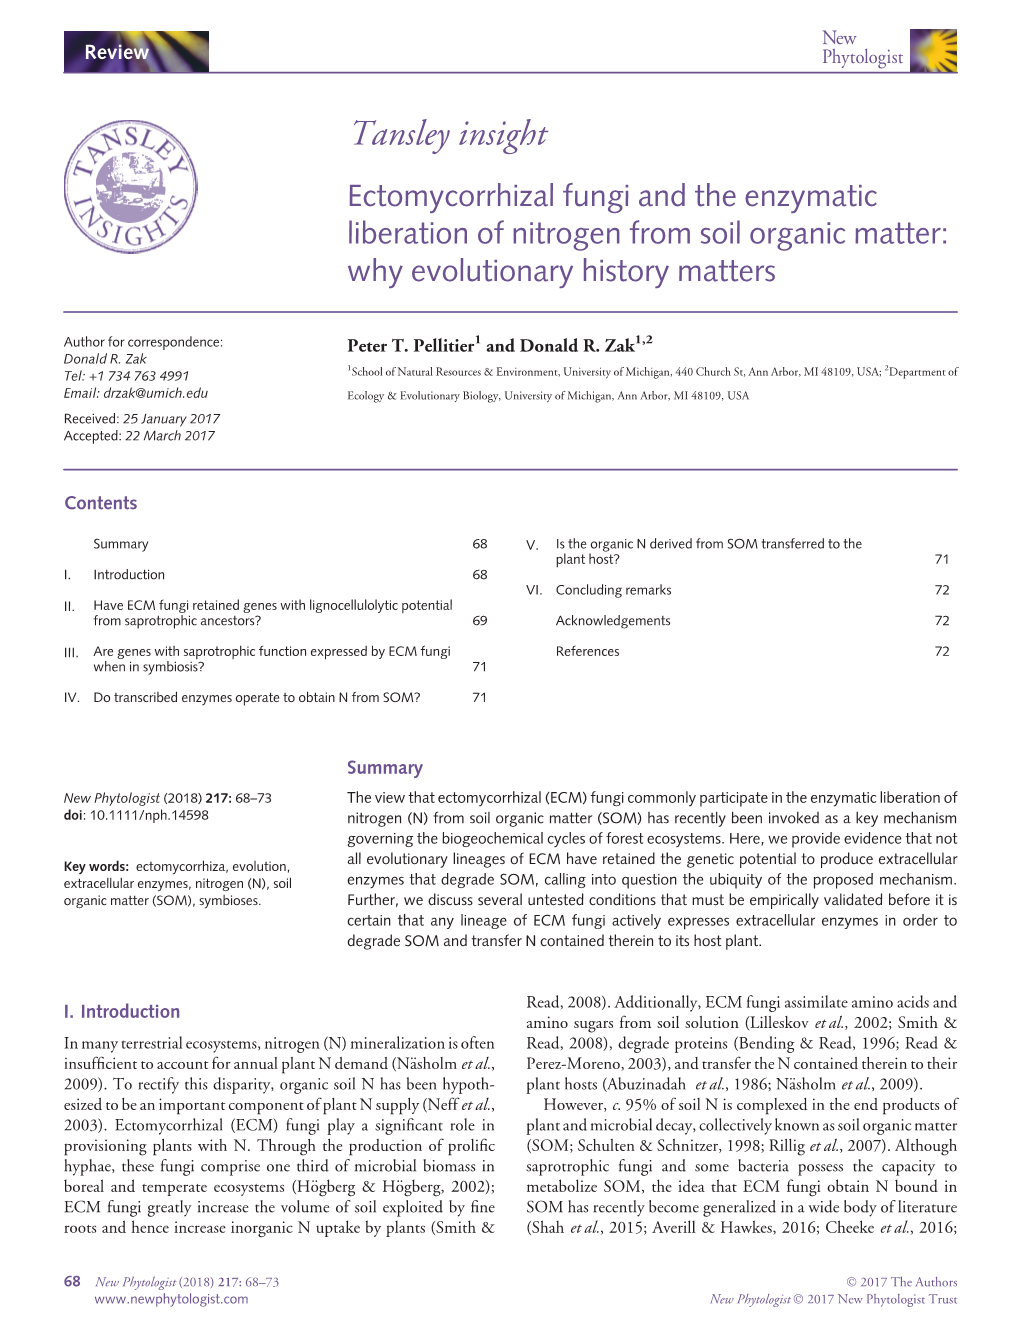 Ectomycorrhizal Fungi and the Enzymatic Liberation of Nitrogen from Soil Organic Matter: Why Evolutionary History Matters